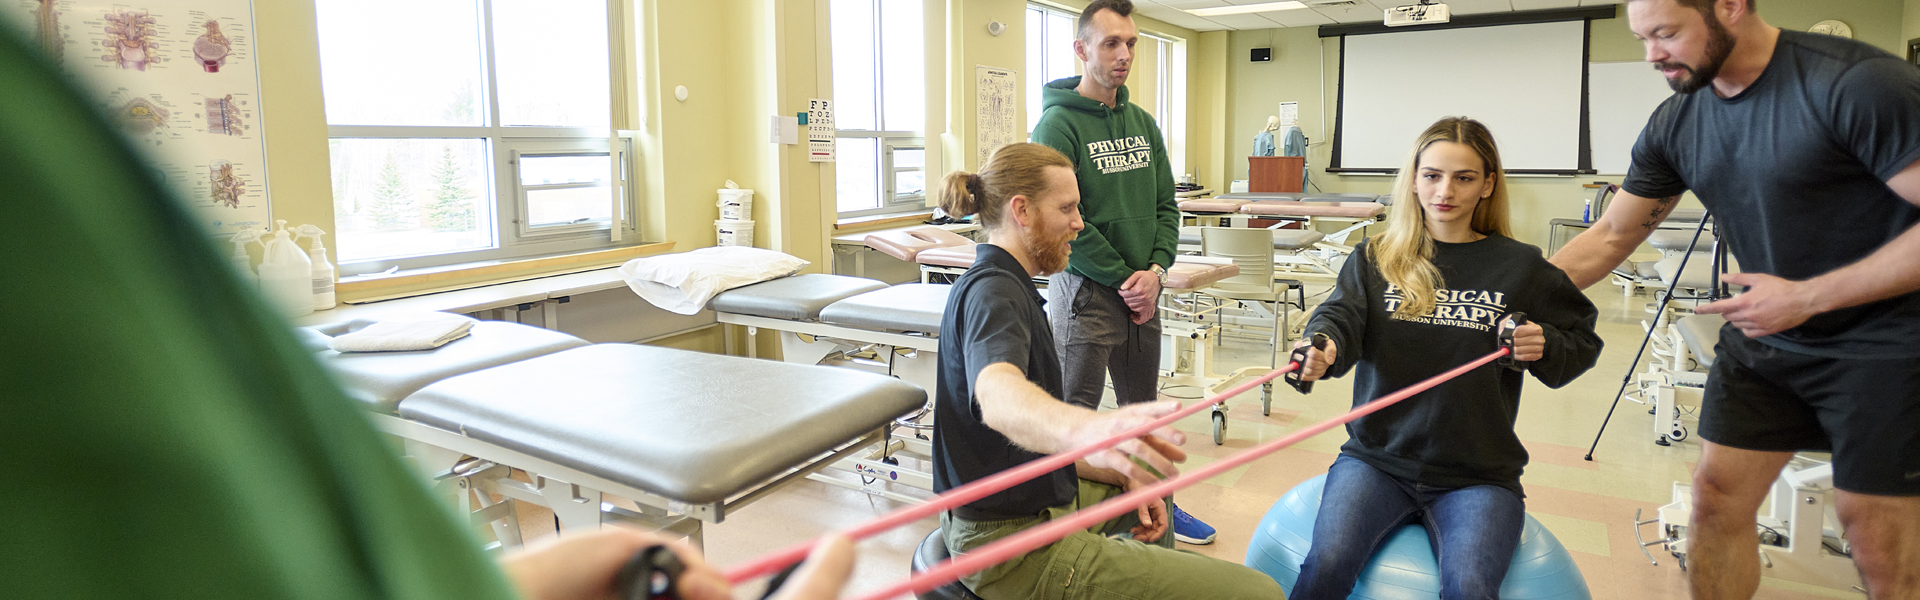 Students work in a Physical Therapy lab with faculty